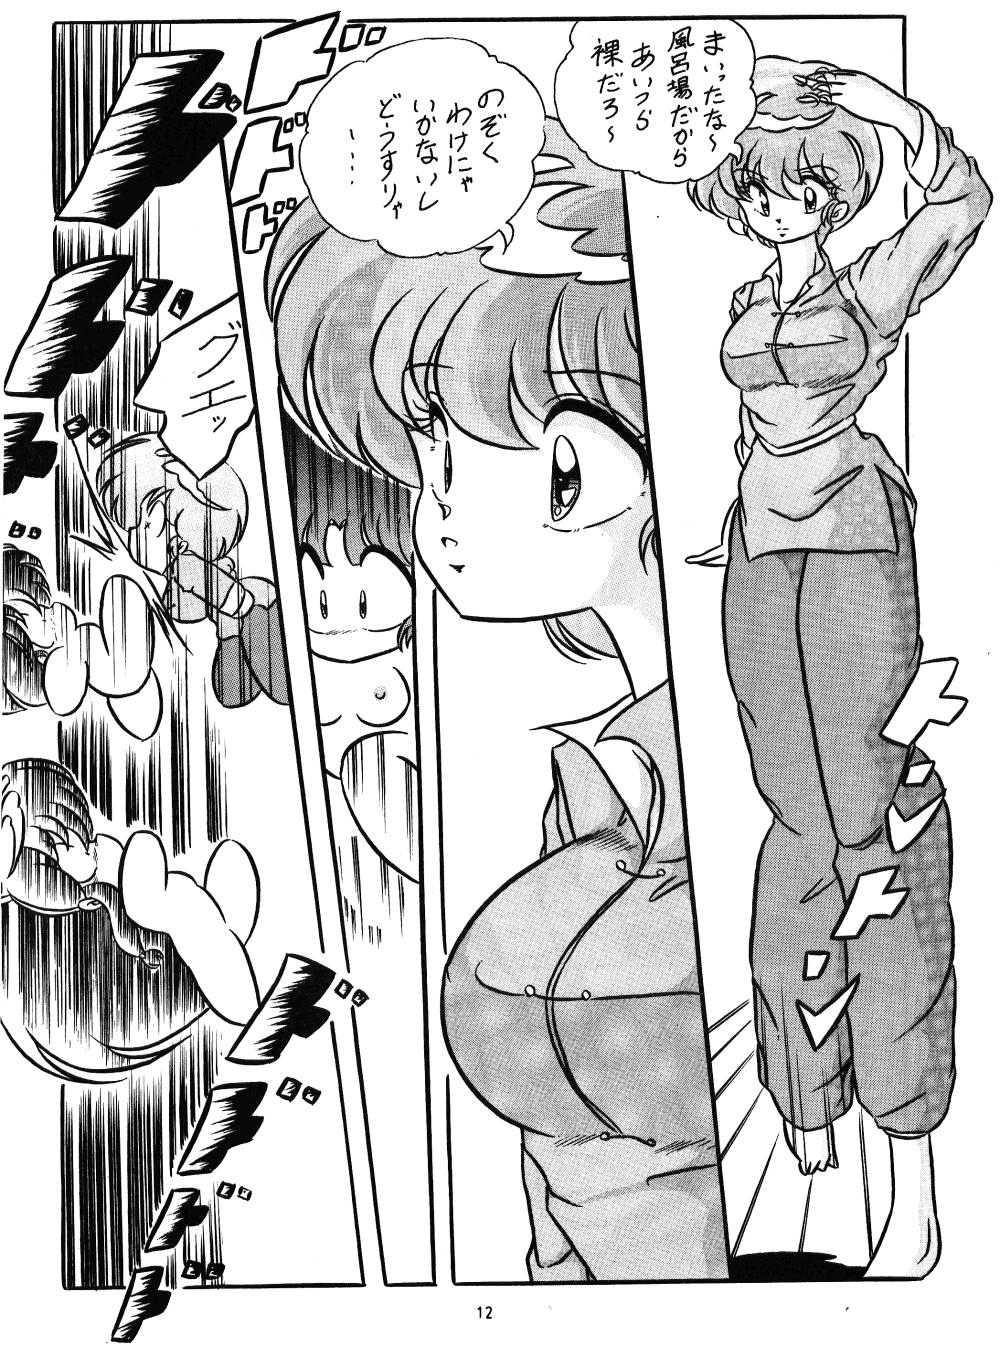 Legs C-COMPANY SPECIAL STAGE 9 - Ranma 12 Tesao - Page 6